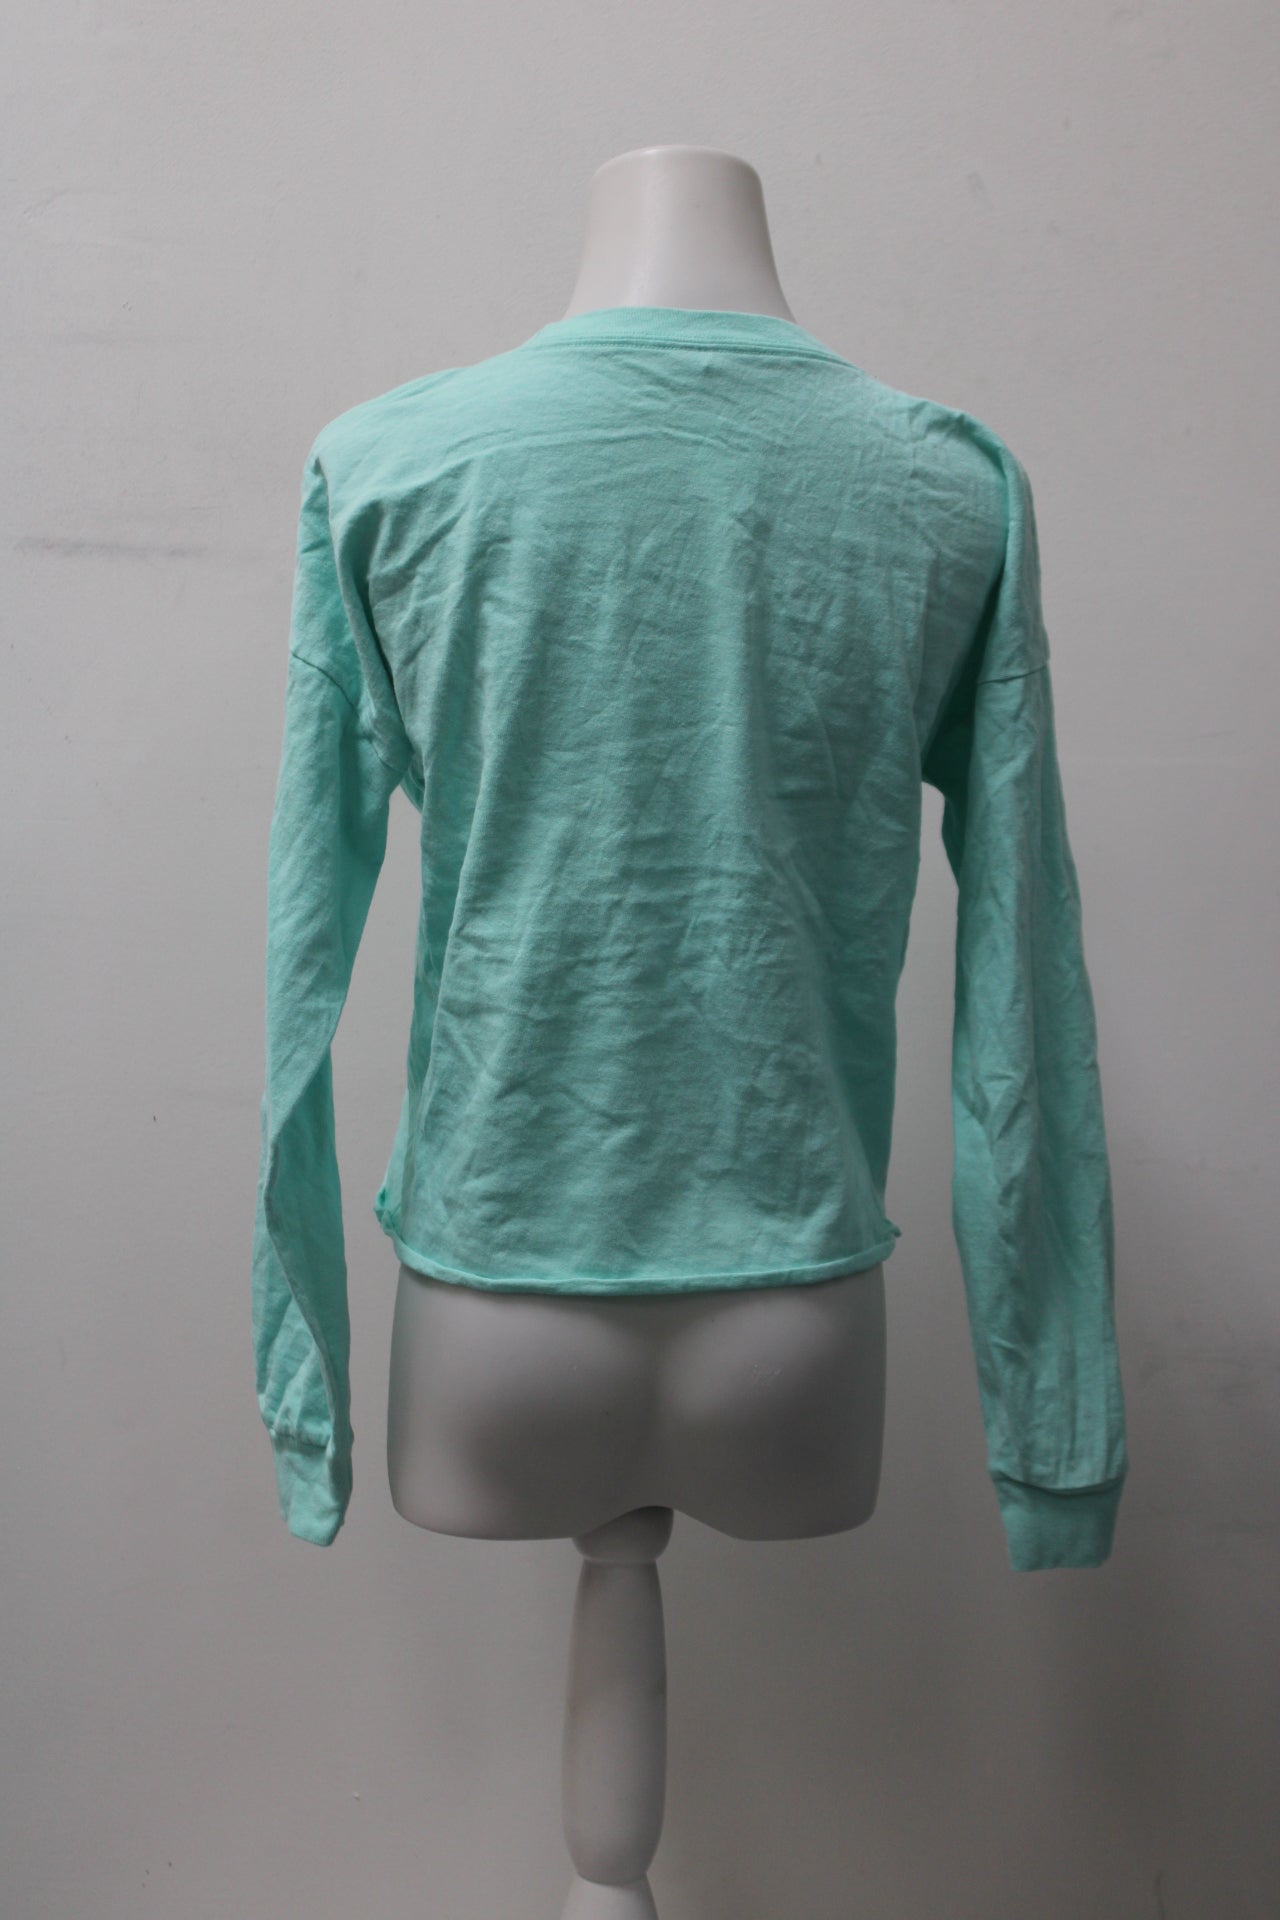 No Brand Women's Top Green M Pre-Owned